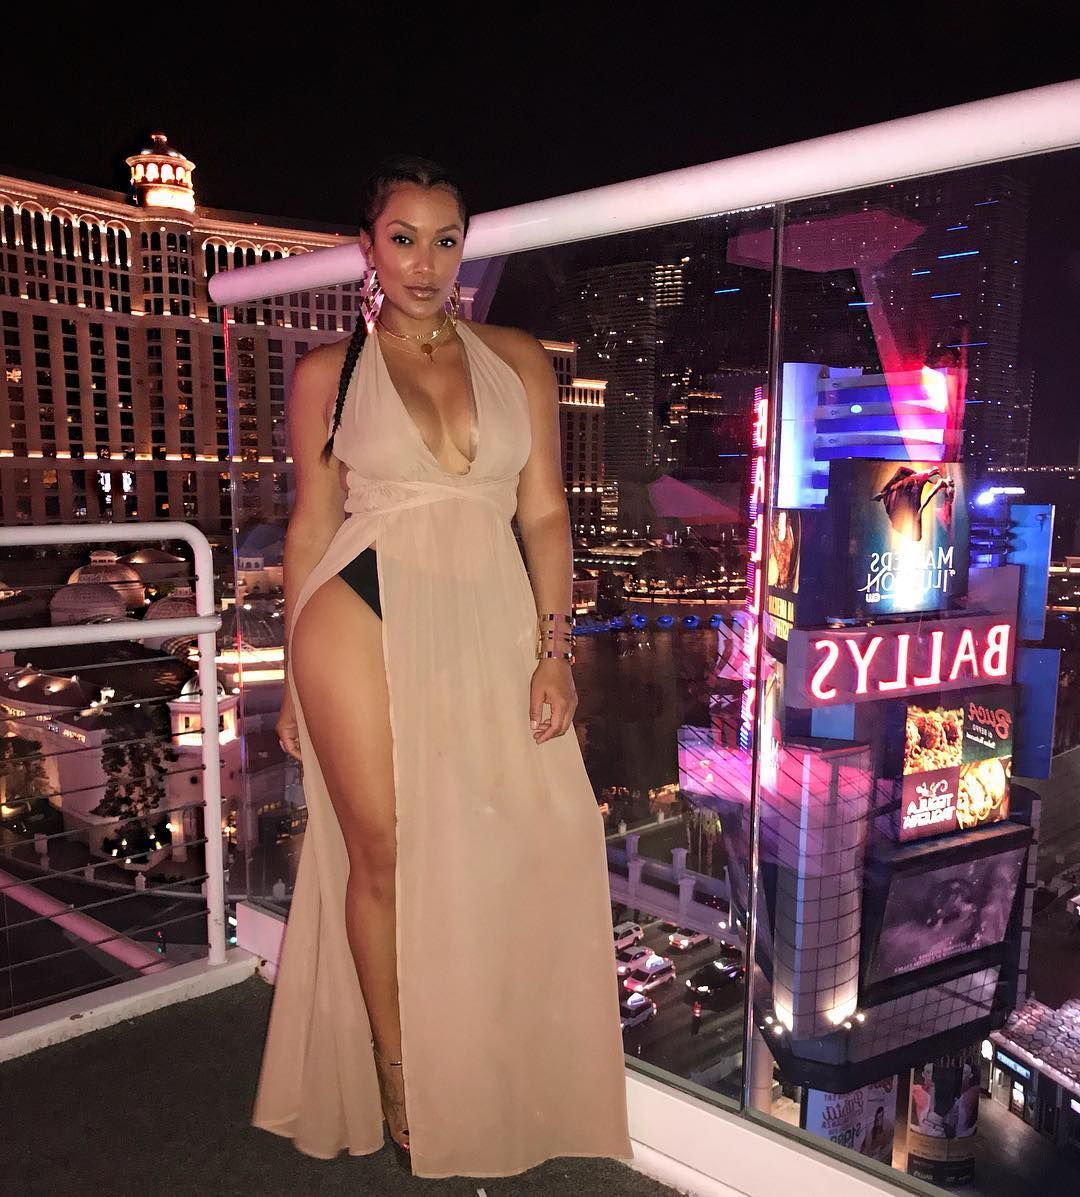 Nelly Girlfriend Shantel Jackson shows lot of skin in Stunning dress with high slit! Pics Here